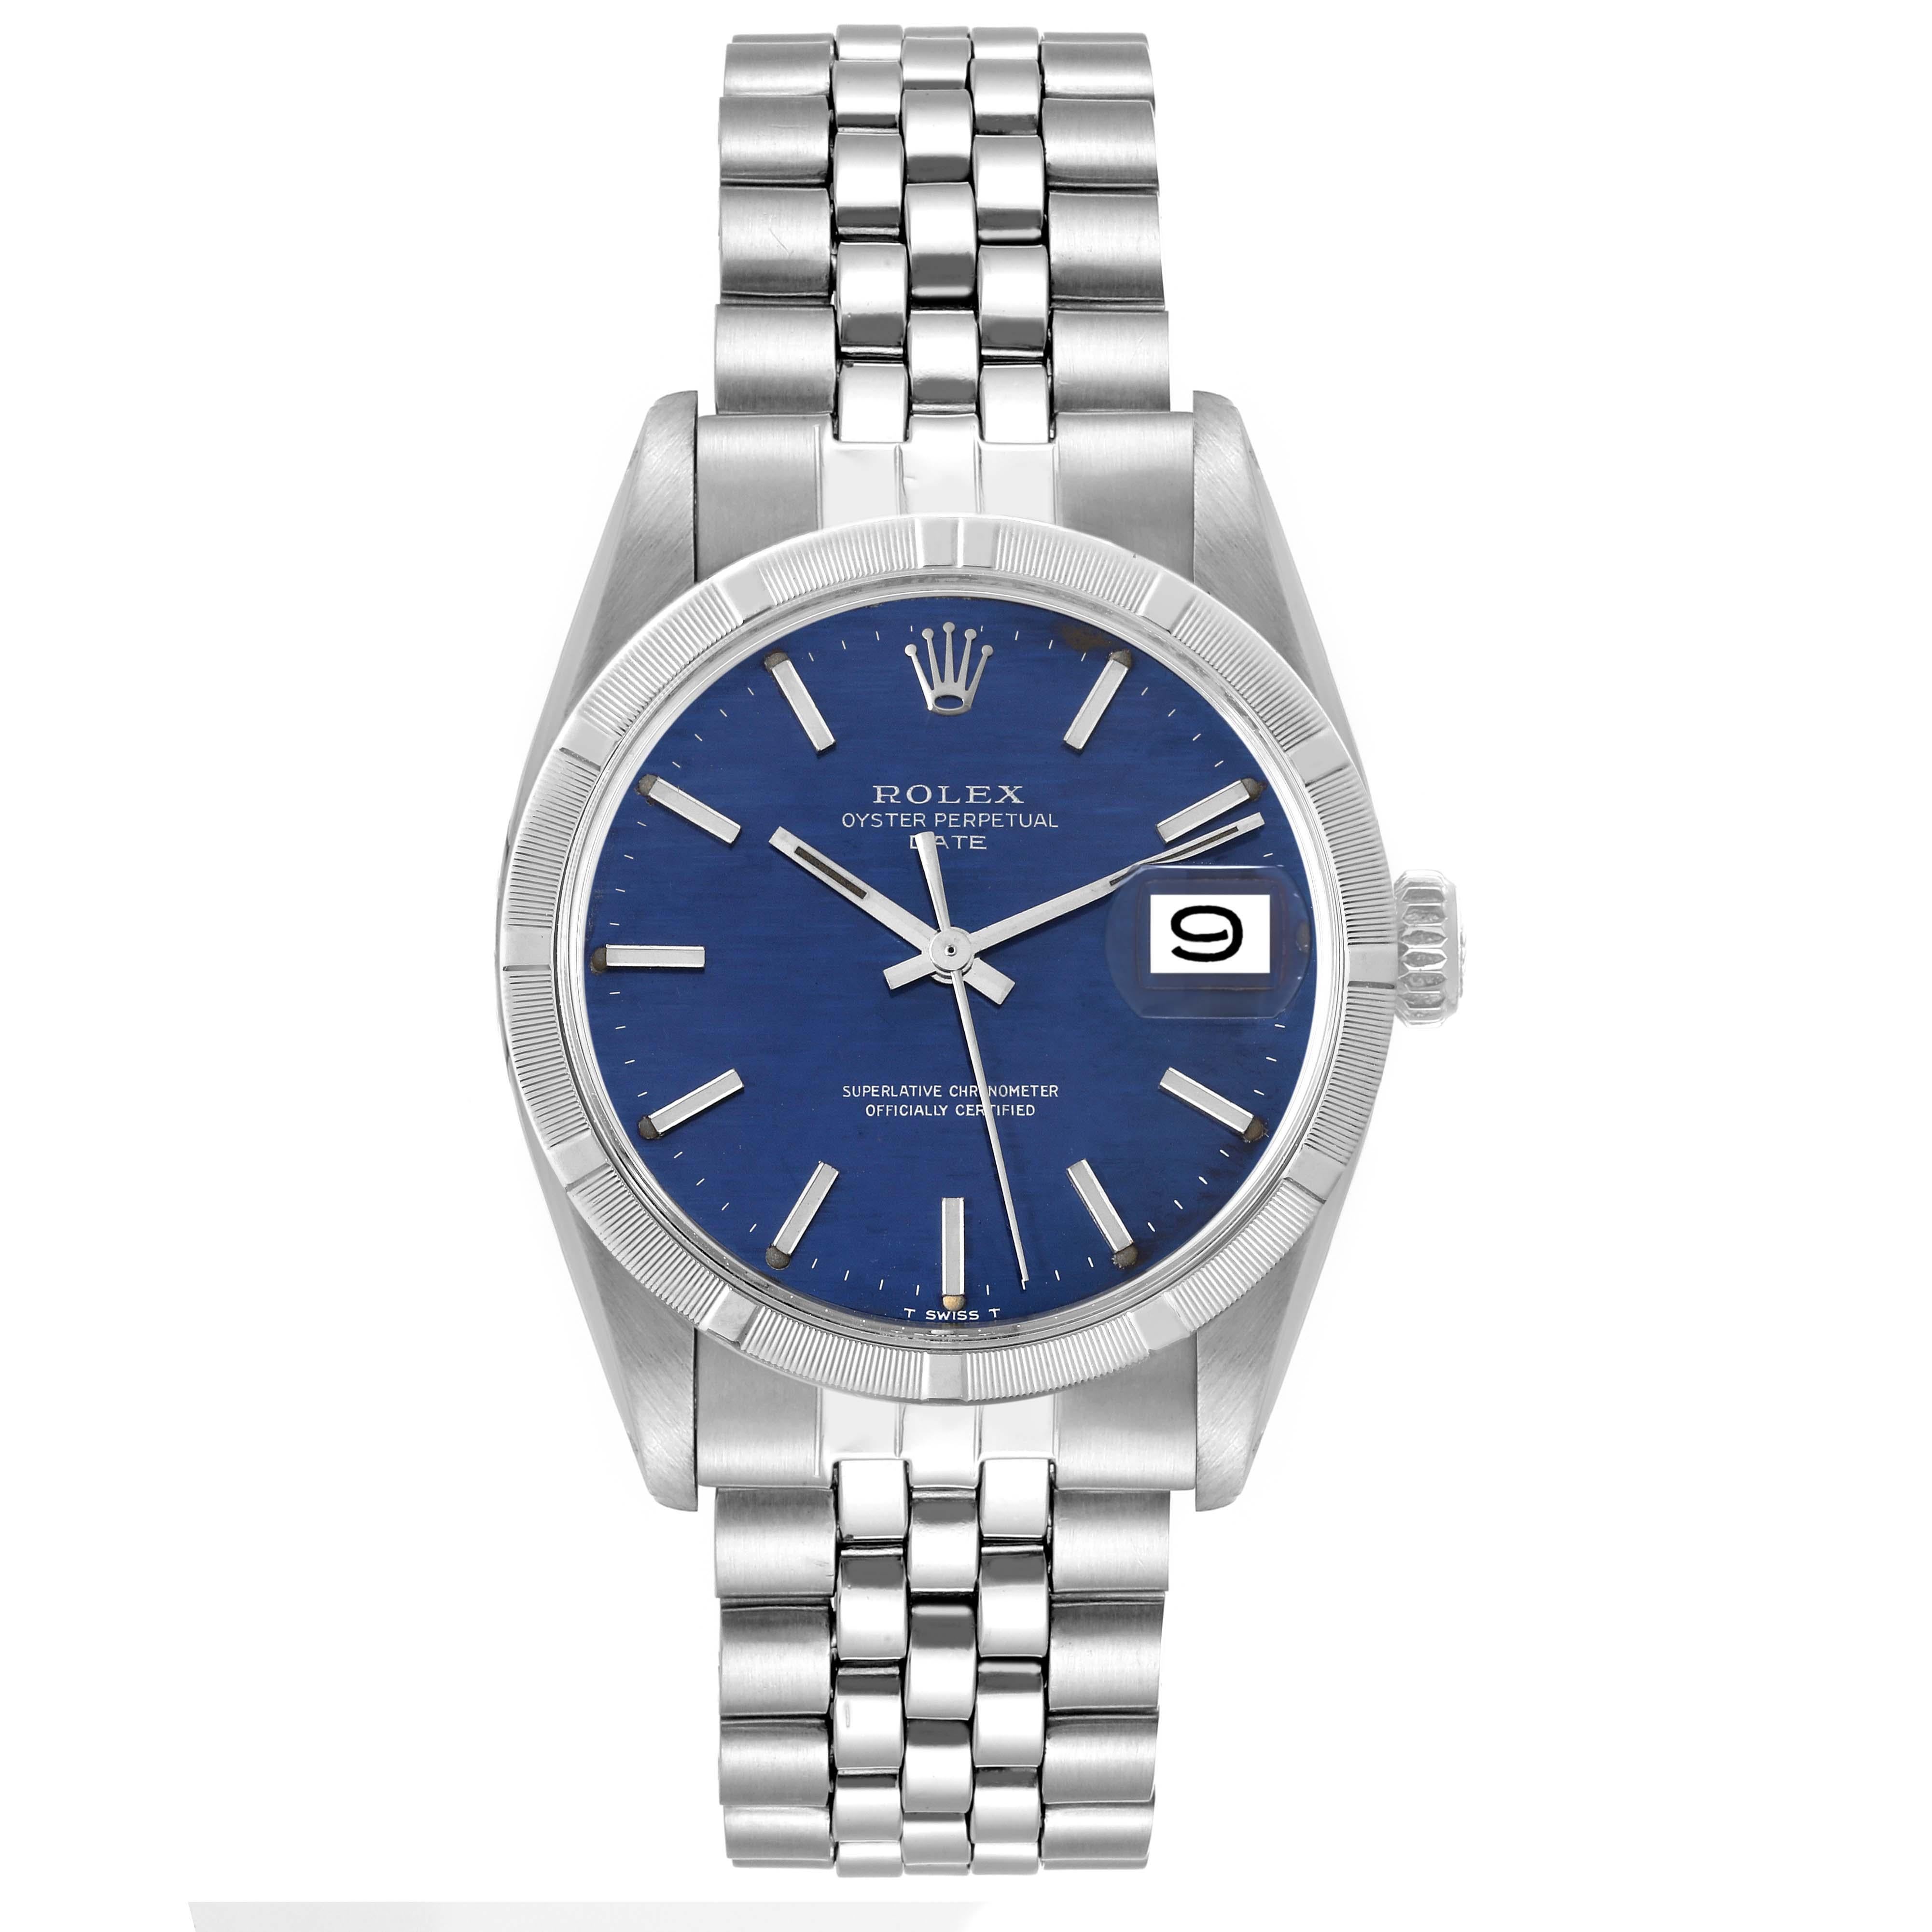 Rolex Date Blue Brick Dial Engine Turned Bezel Vintage Steel Mens Watch 1501. Officially certified chronometer automatic self-winding movement. Stainless steel oyster case 35.0 mm in diameter. Rolex logo on the crown. Stainless steel engine turned